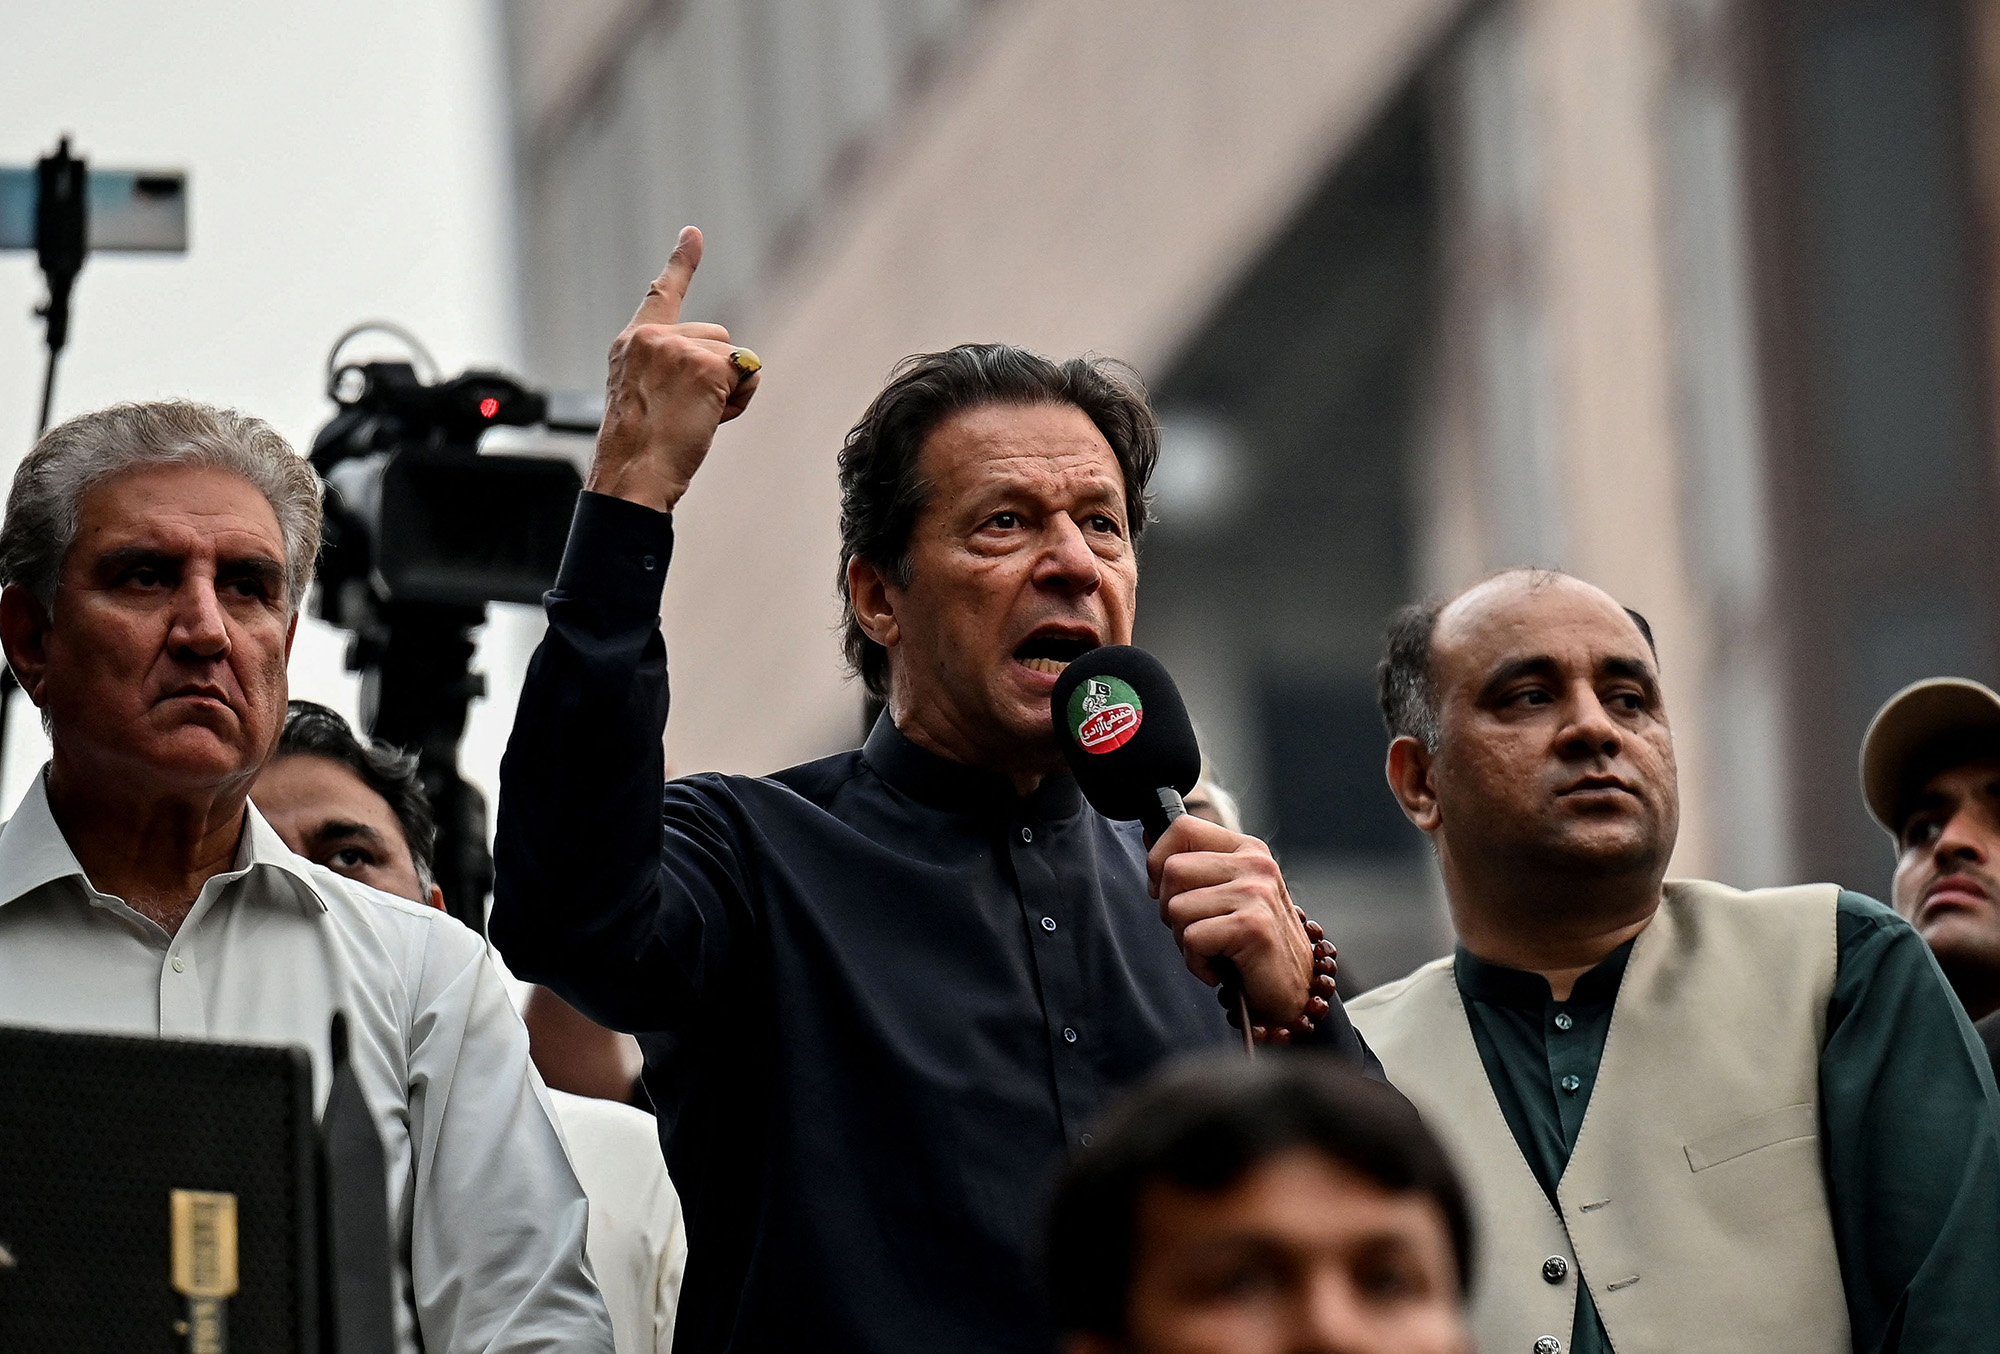 Lobna Khansex - Imran Khan Latest Updates: Khan Shot at a Rally, in Stable Condition -  Bloomberg